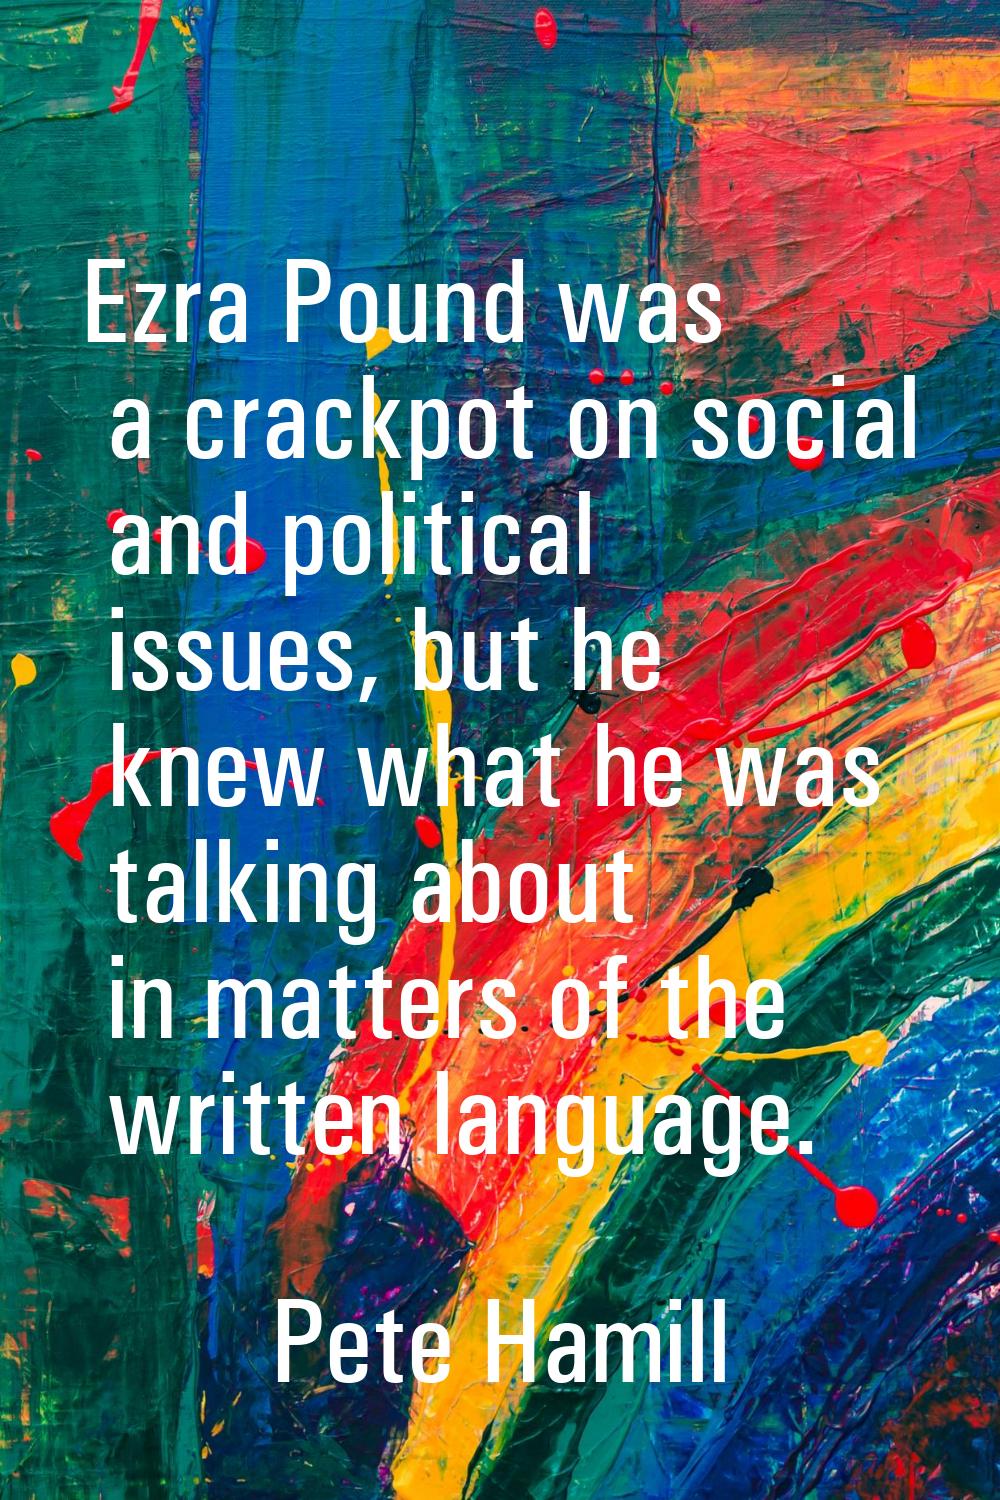 Ezra Pound was a crackpot on social and political issues, but he knew what he was talking about in 